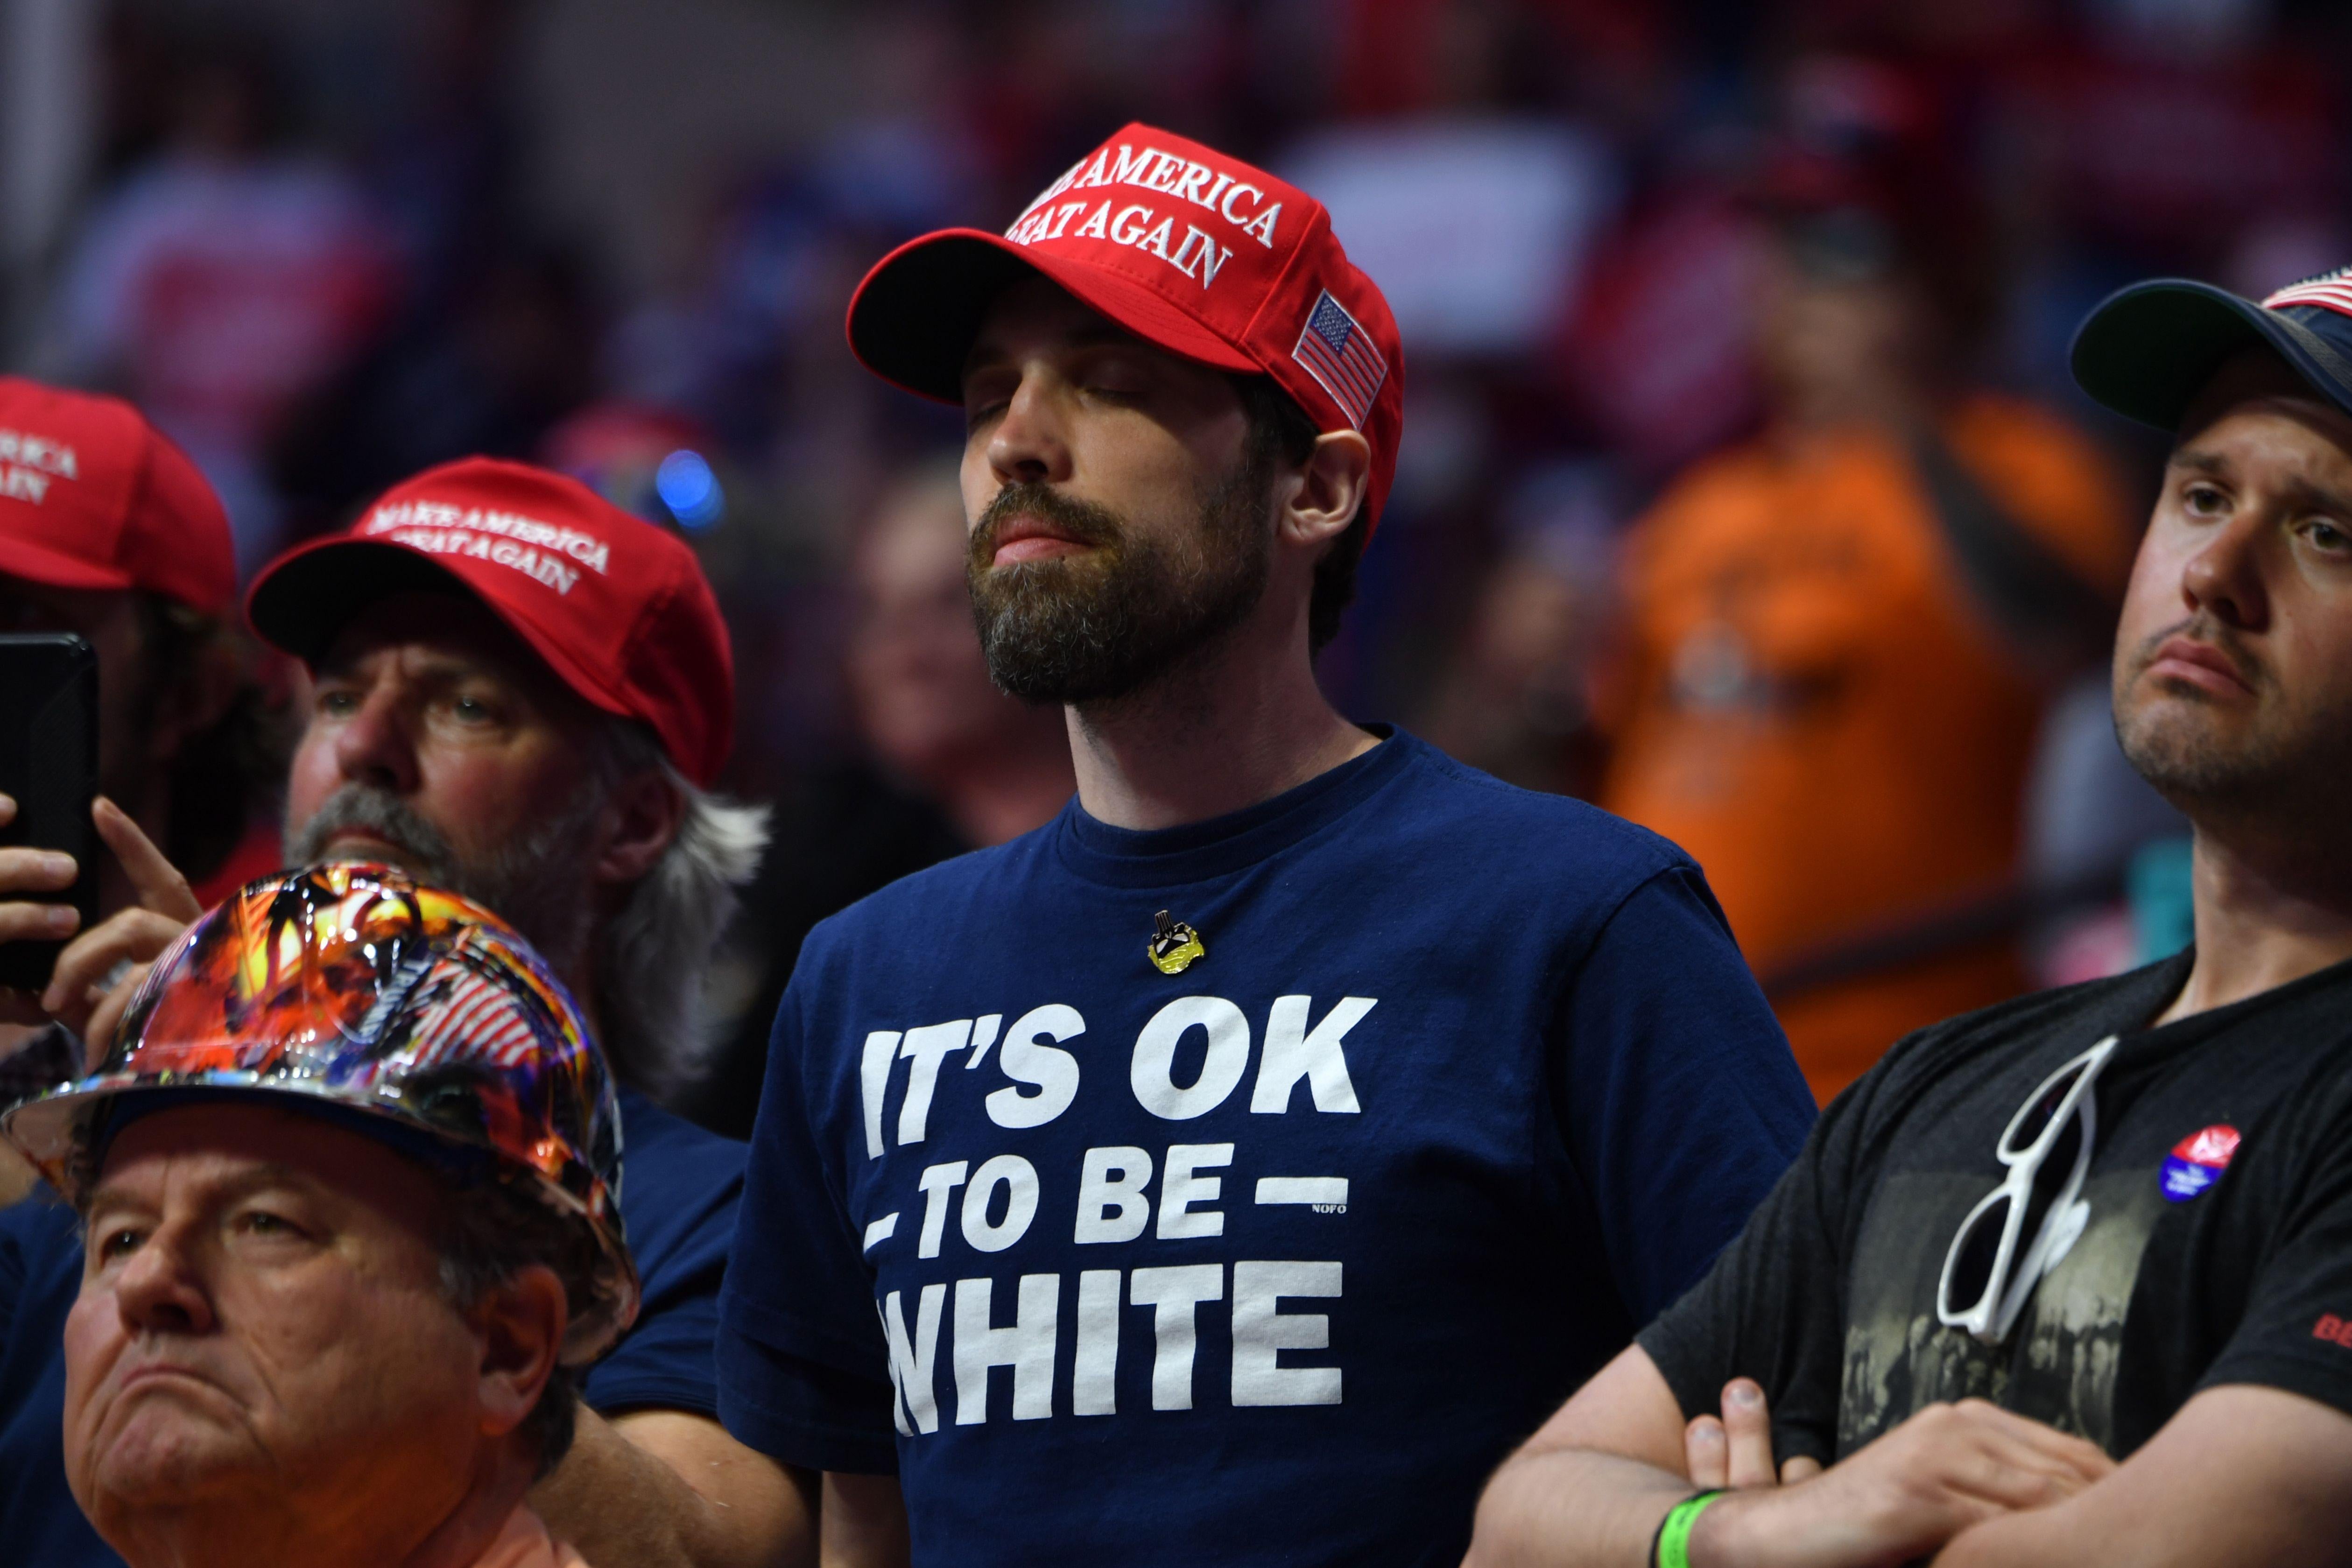 Man wearing an "It's OK to Be White" shirt in the audience of Trump supporters listening as Trump speaks